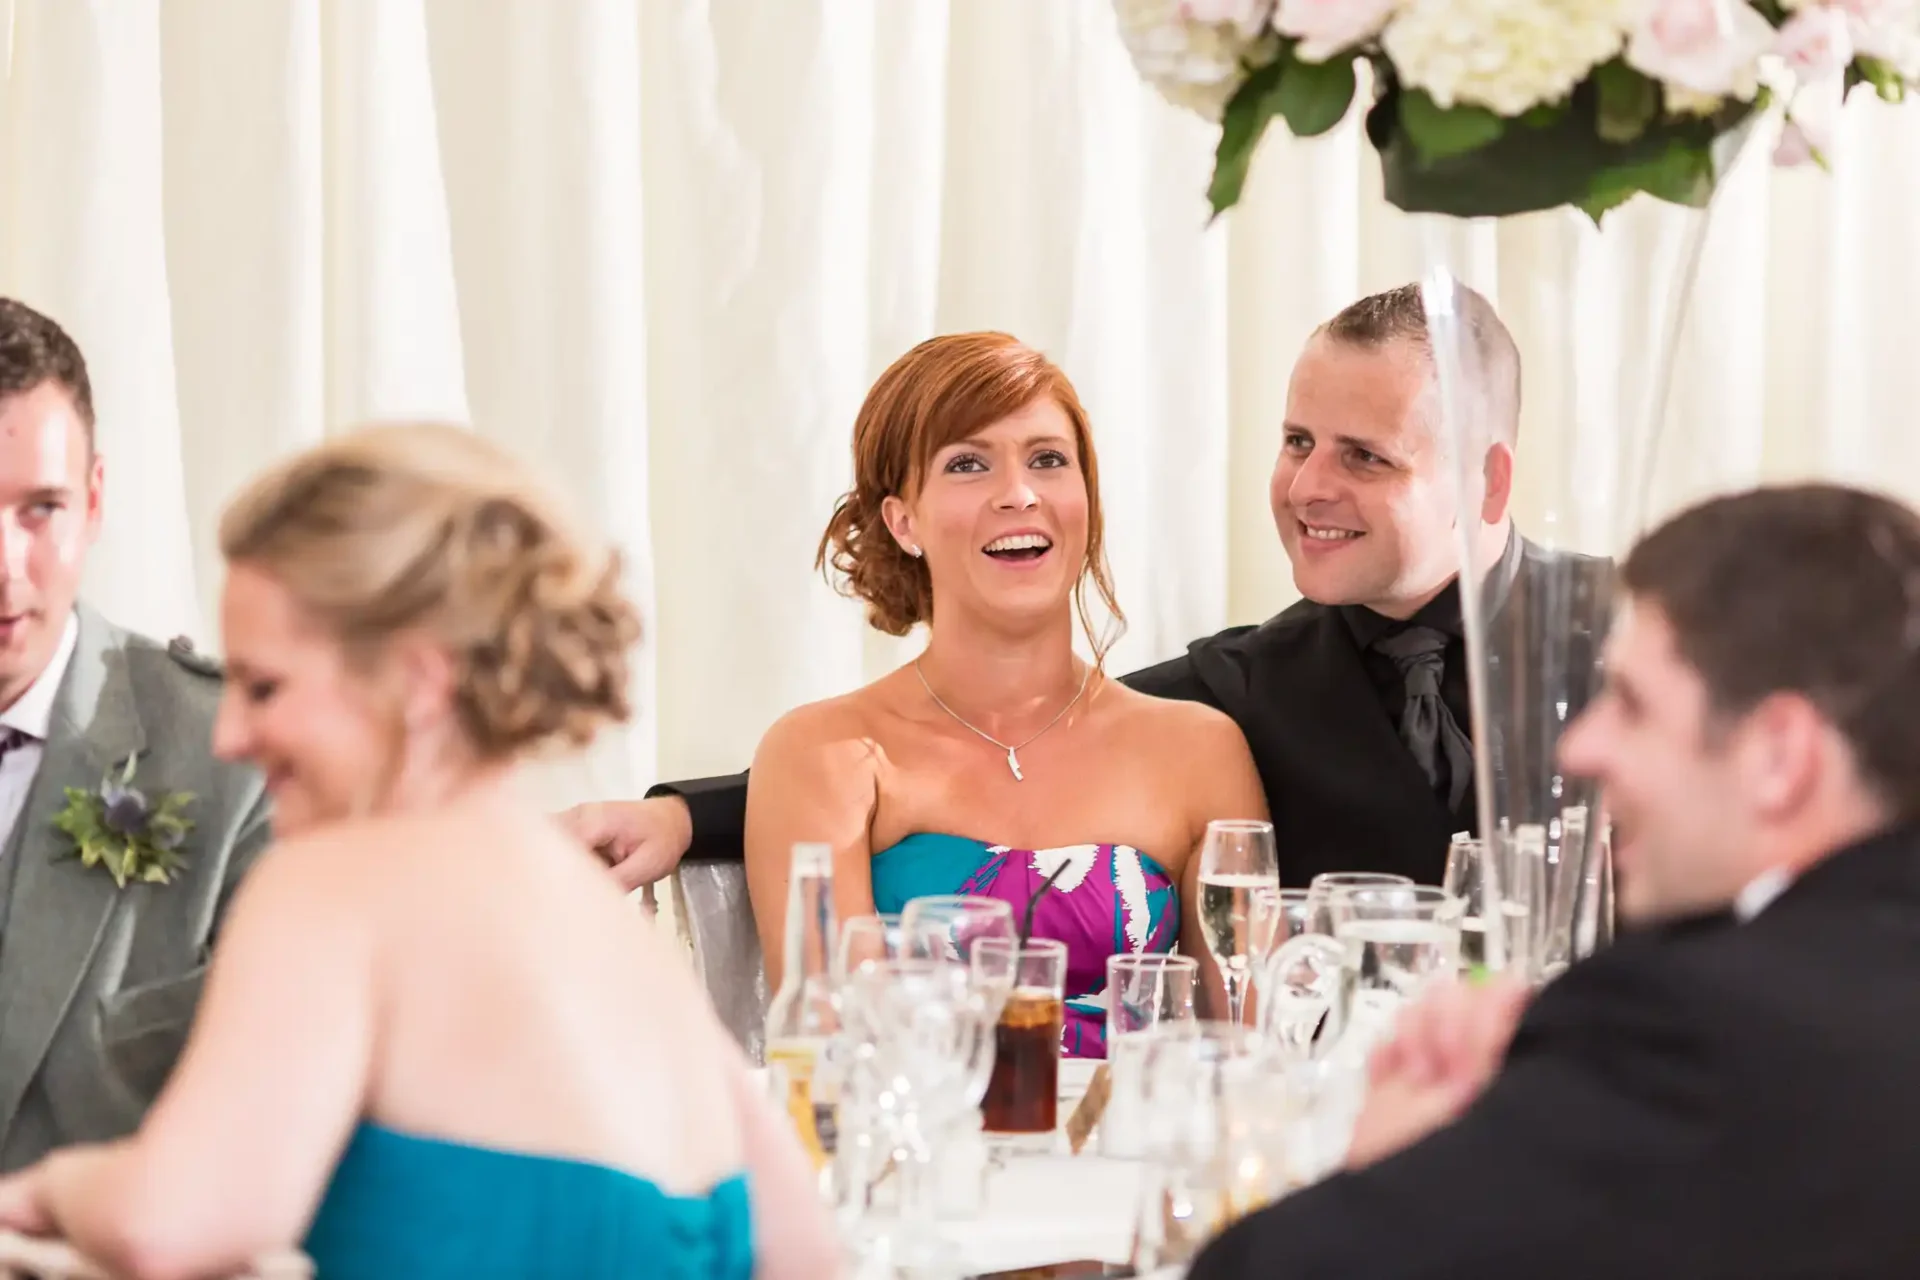 A joyful bride and groom sitting at a wedding reception table surrounded by guests, with floral decorations visible.